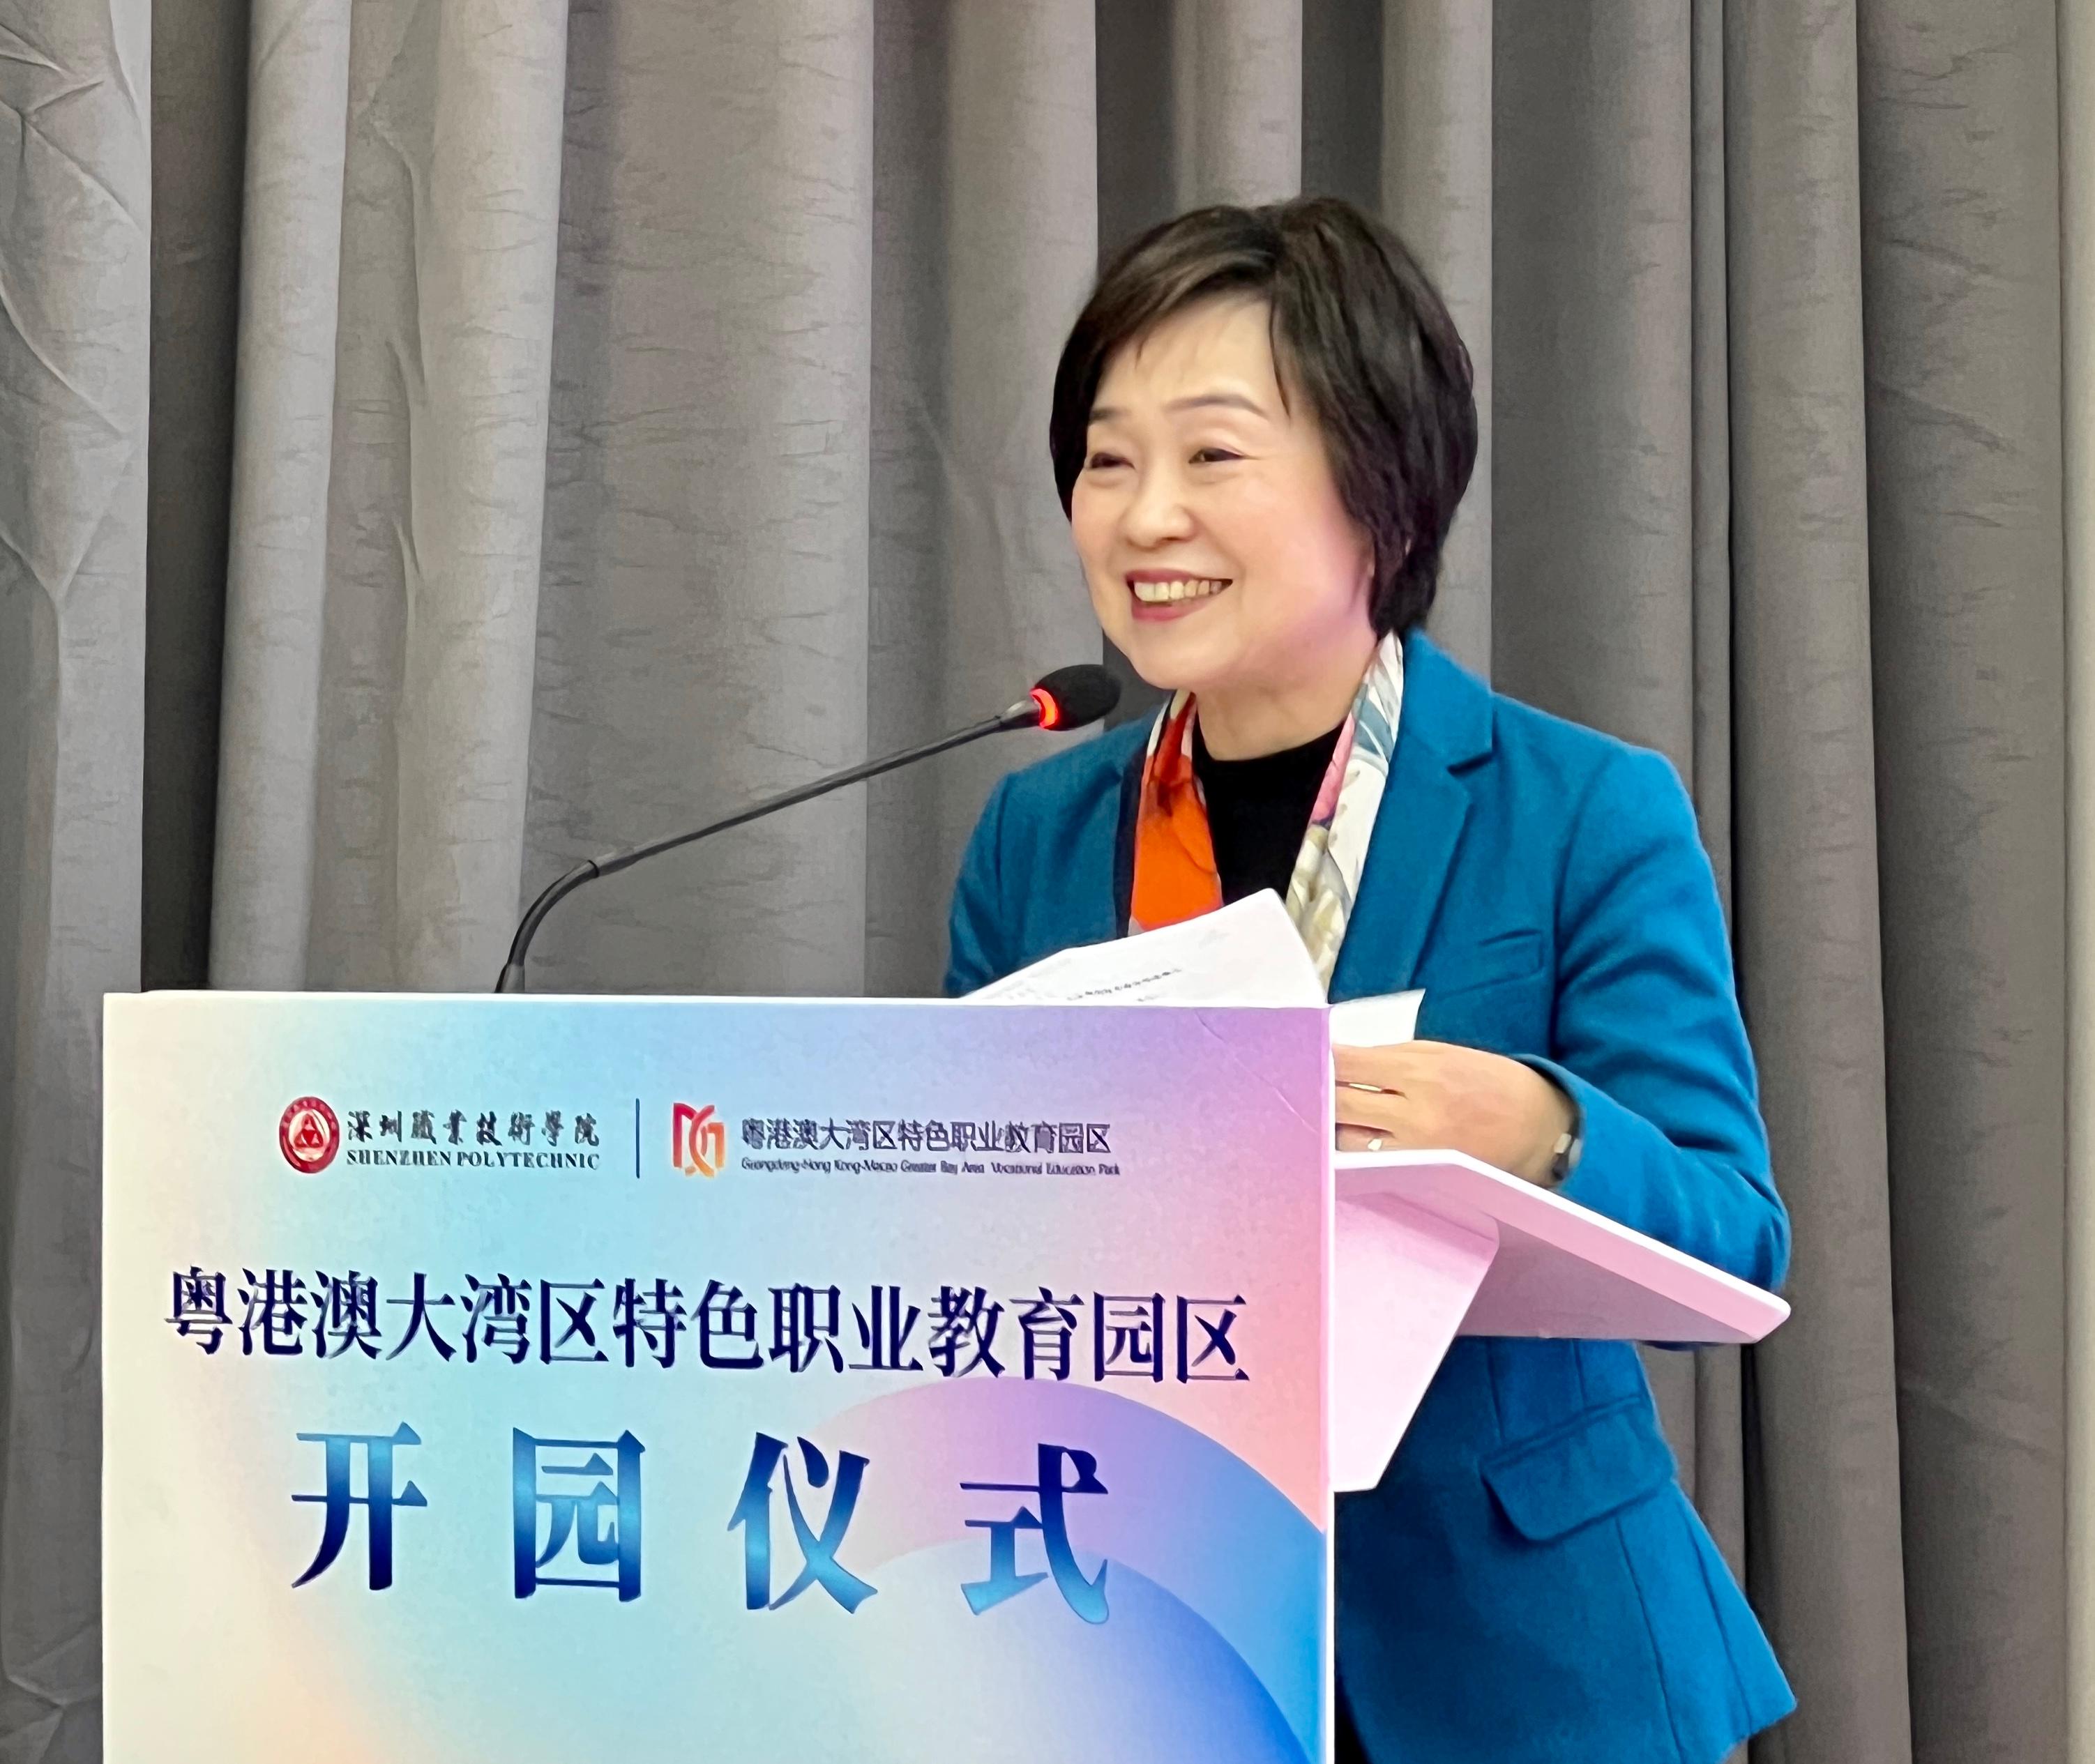 The Secretary for Education, Dr Choi Yuk-lin, delivers a speech at the opening ceremony of the Guangdong-Hong Kong-Macao Greater Bay Area Vocational Education Park in Shenzhen today (March 17).